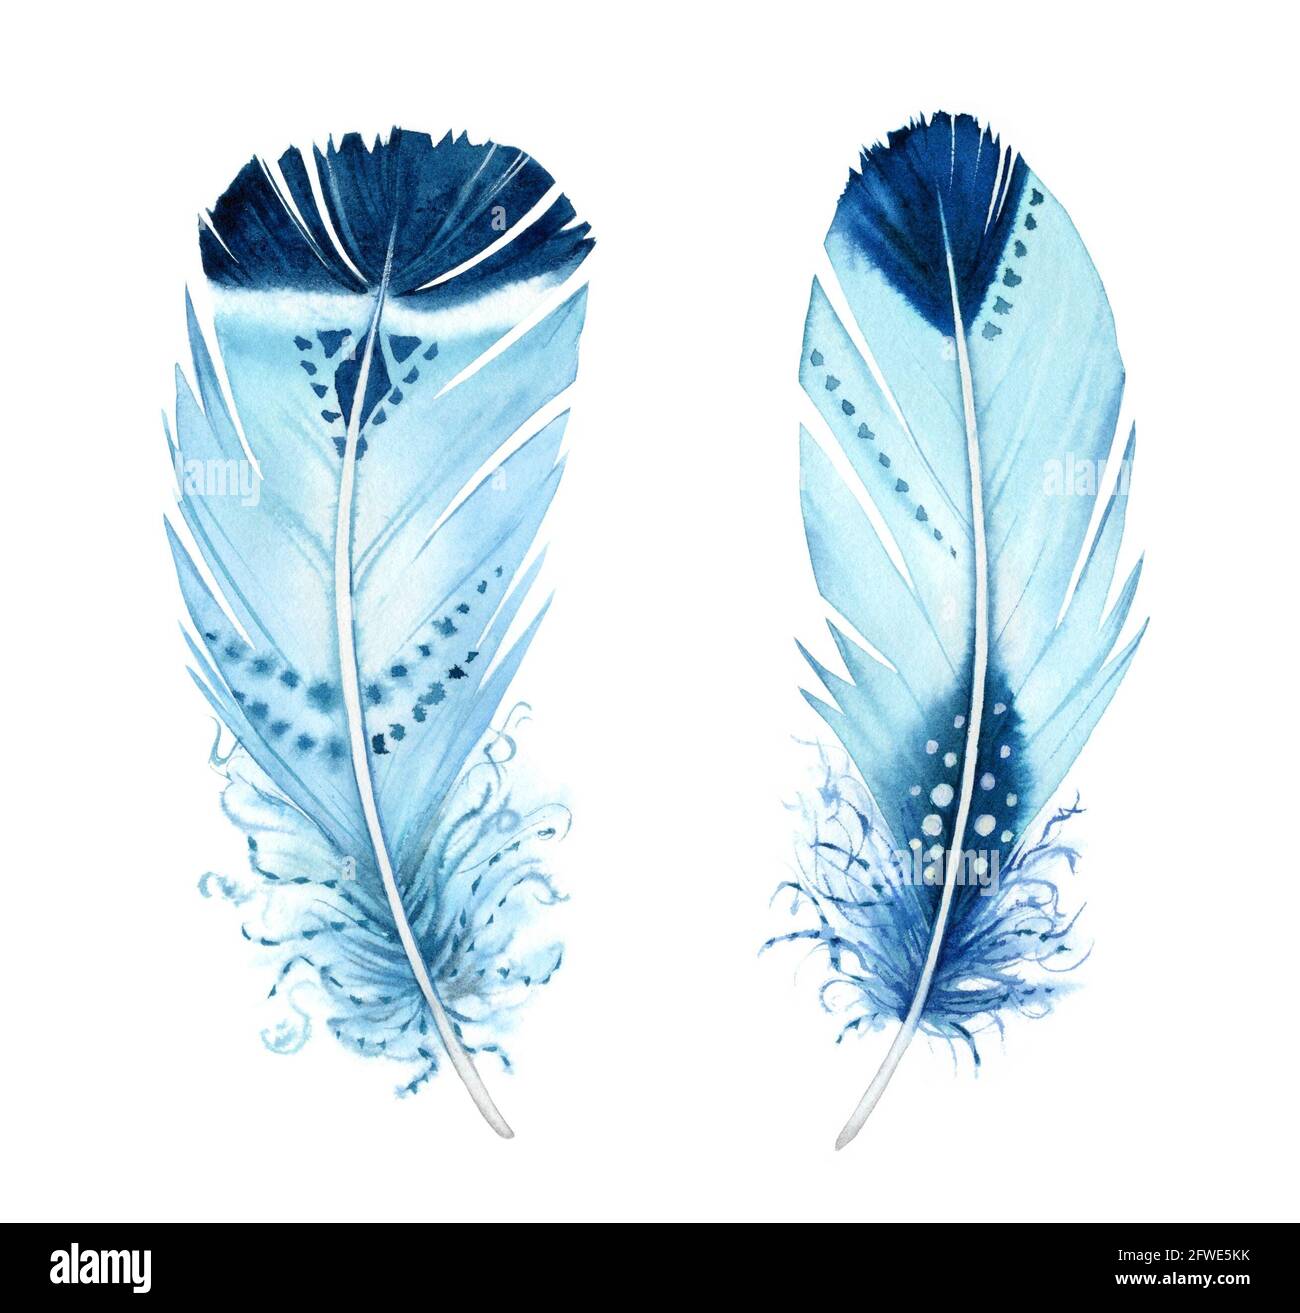 Watercolor feather set. Realistic painting with vibrant turquoise ornaments. Boho style illustration isolated on white Stock Photo